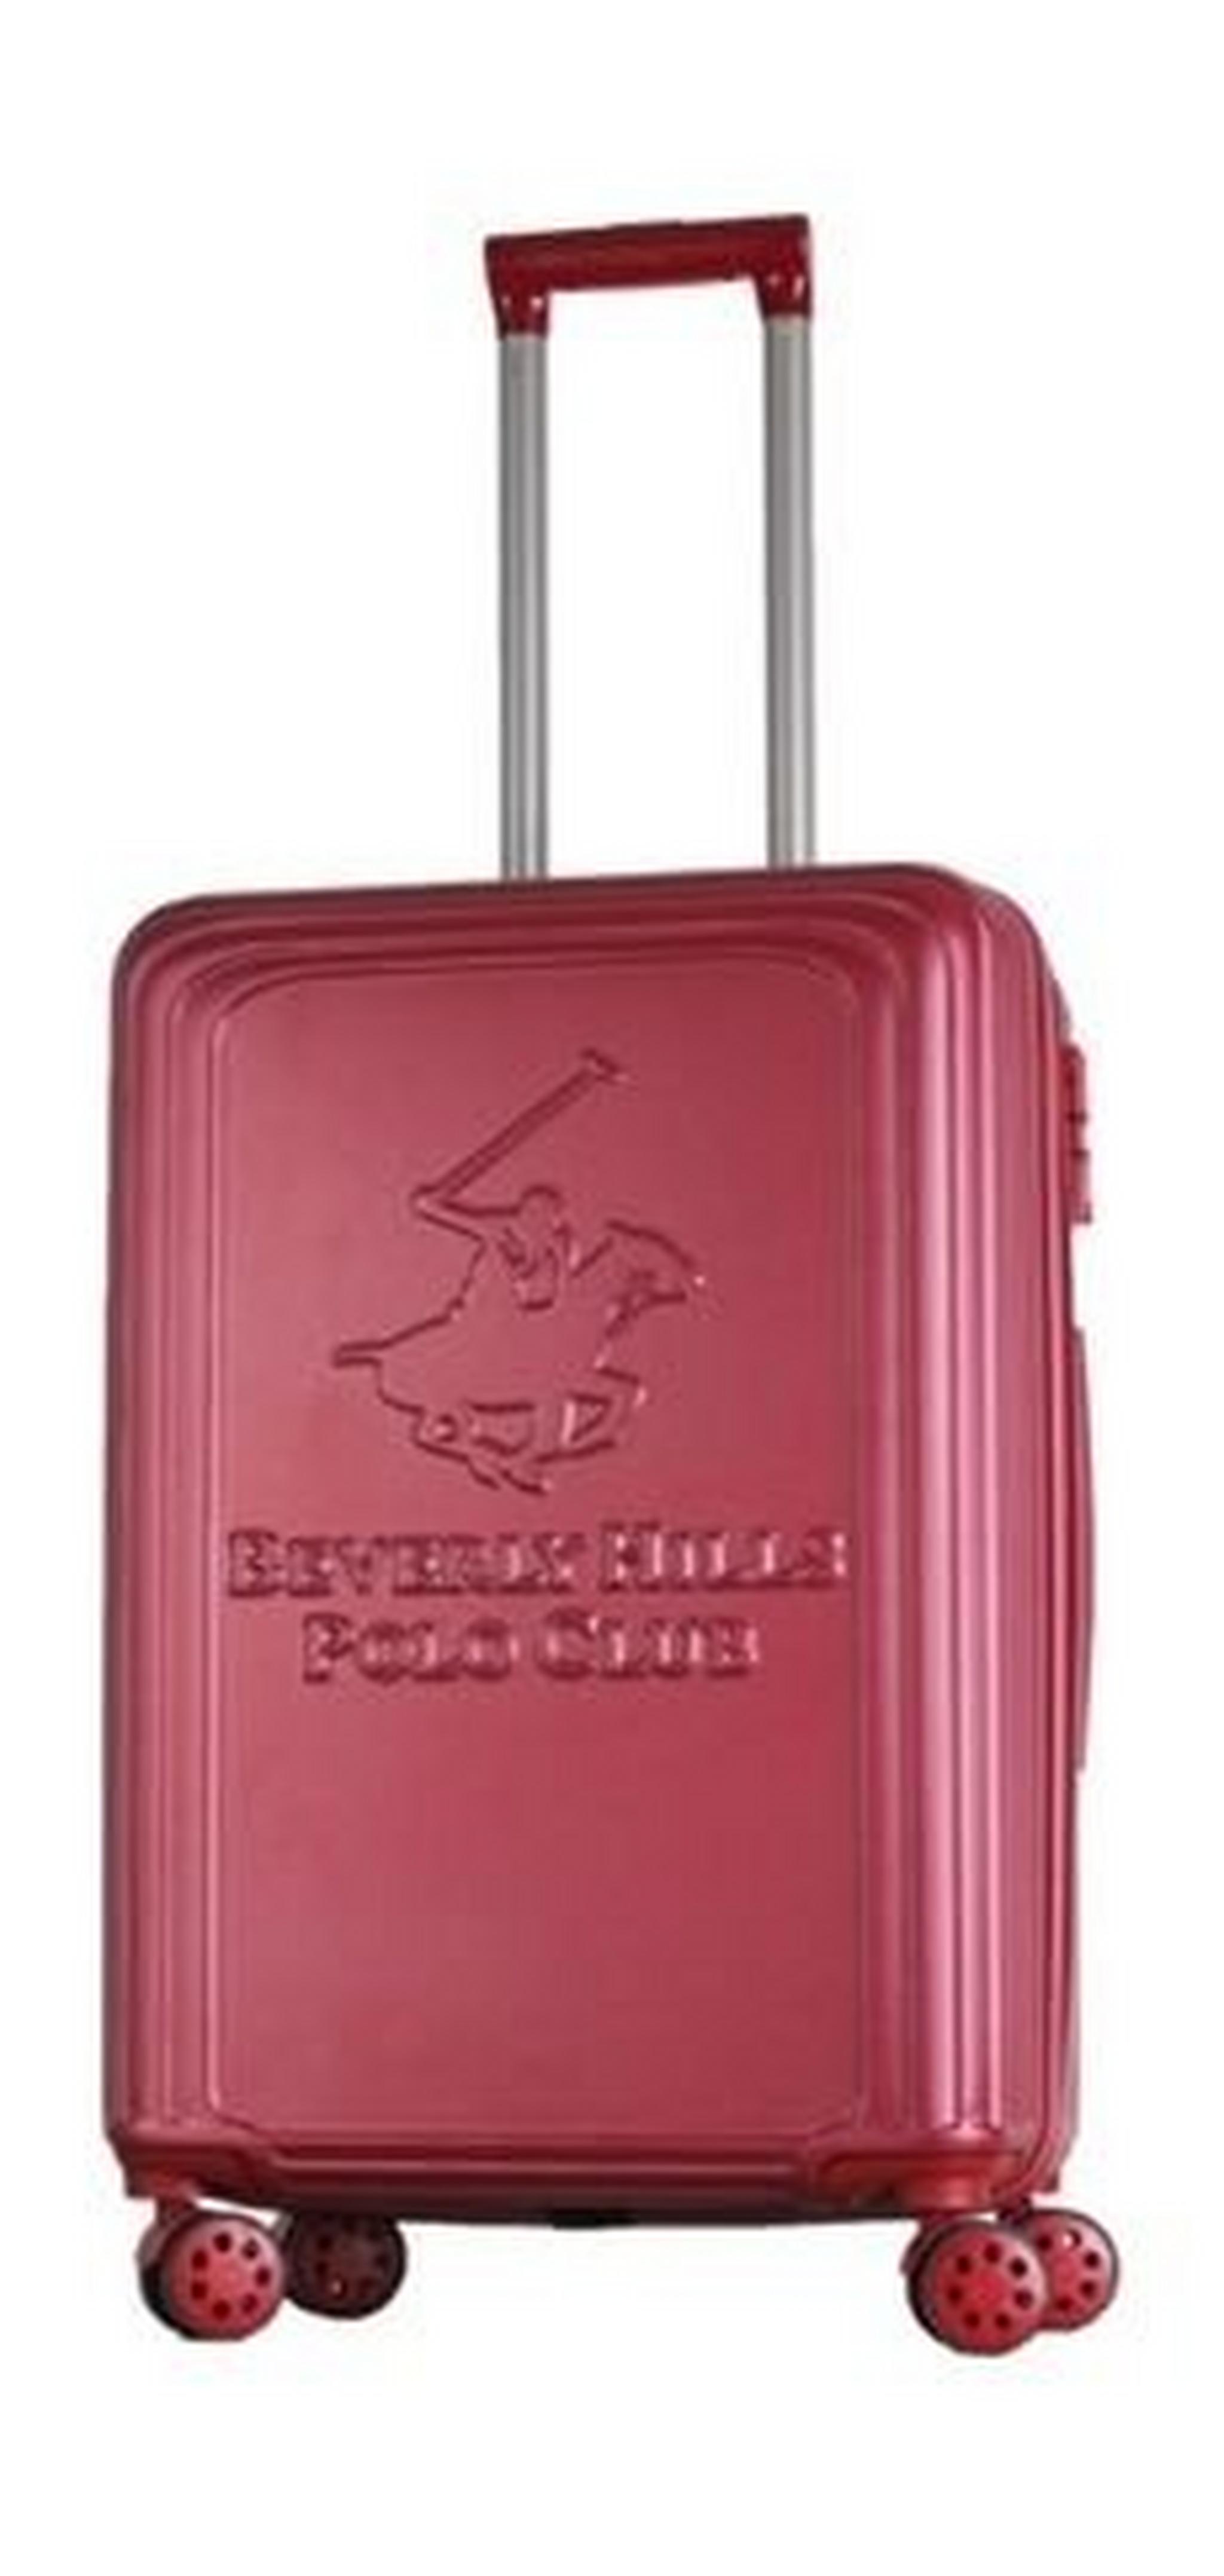 US POLO Paco Hard Trolley Luggage - Small/Red